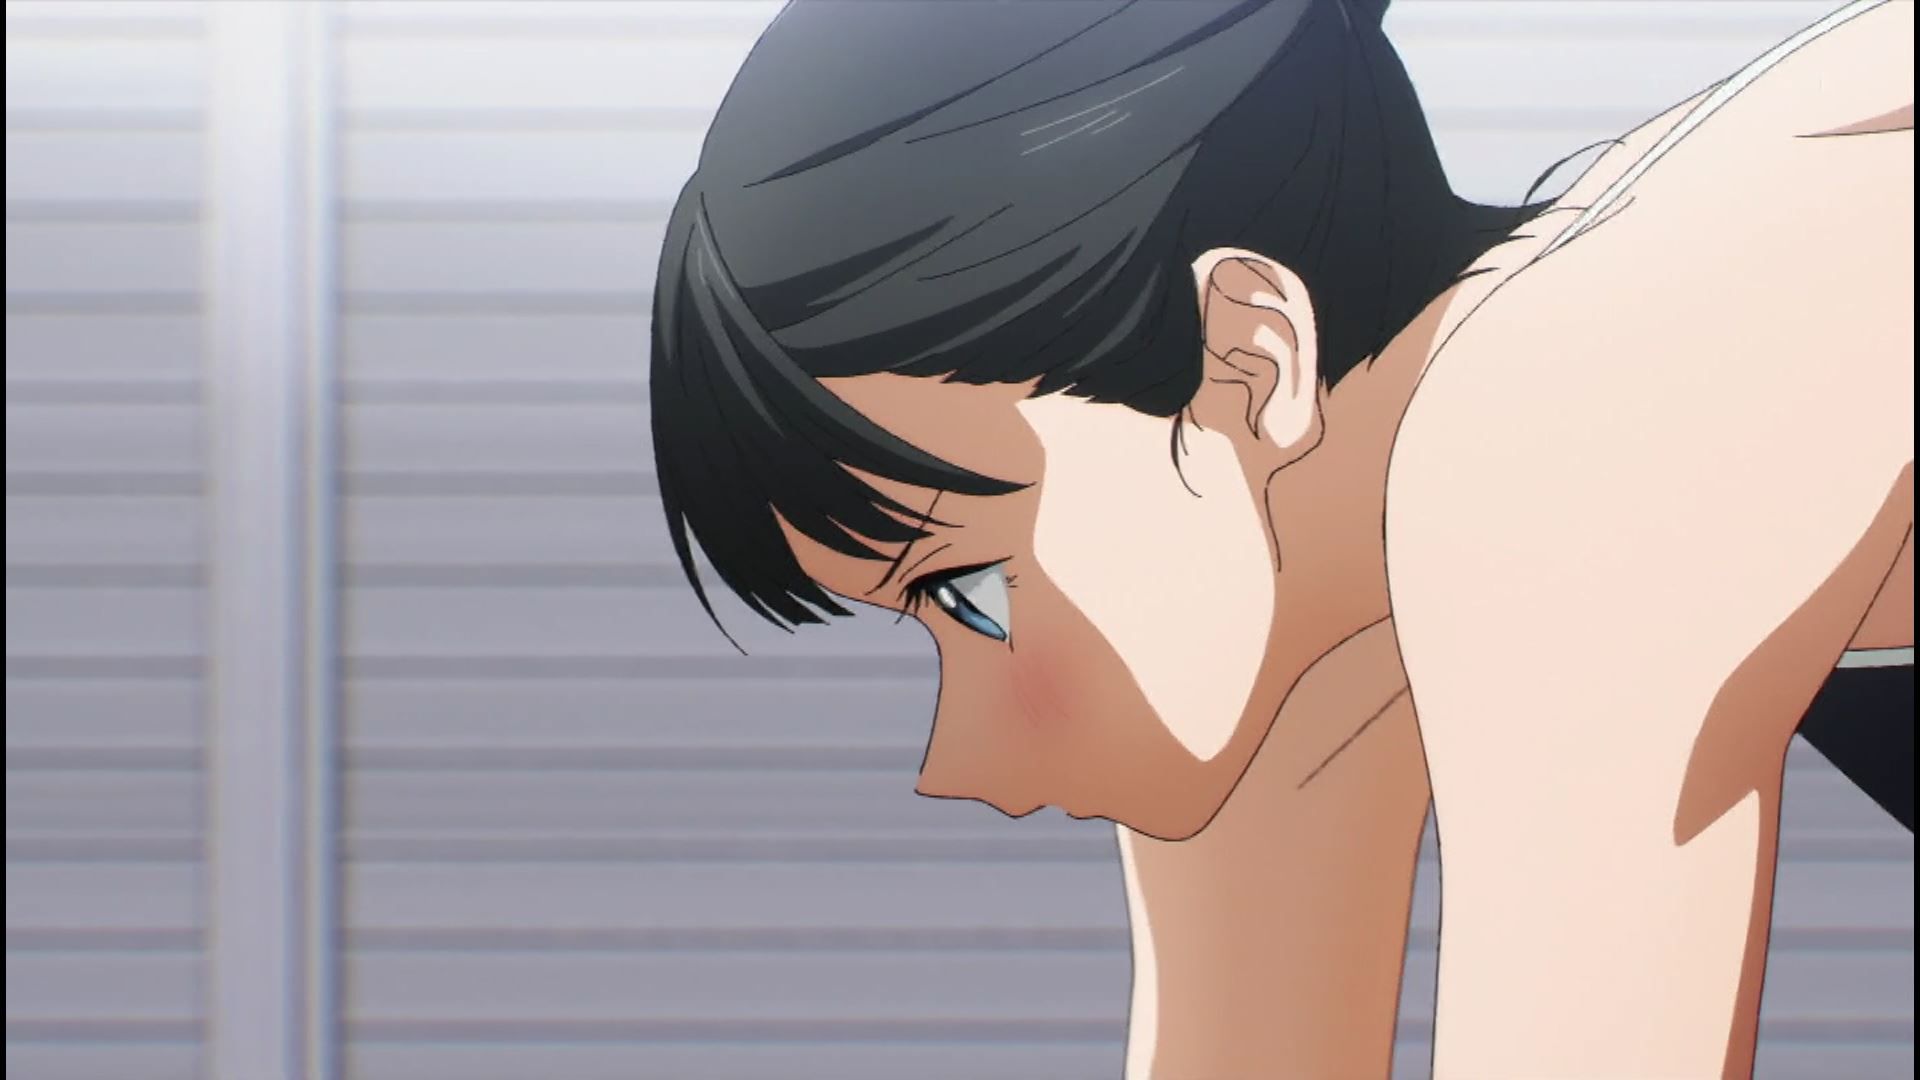 Anime "Tomorrow's Sailor Suit" In episode 12, the final episode such as girls' erotic water and sheer dresses! 18